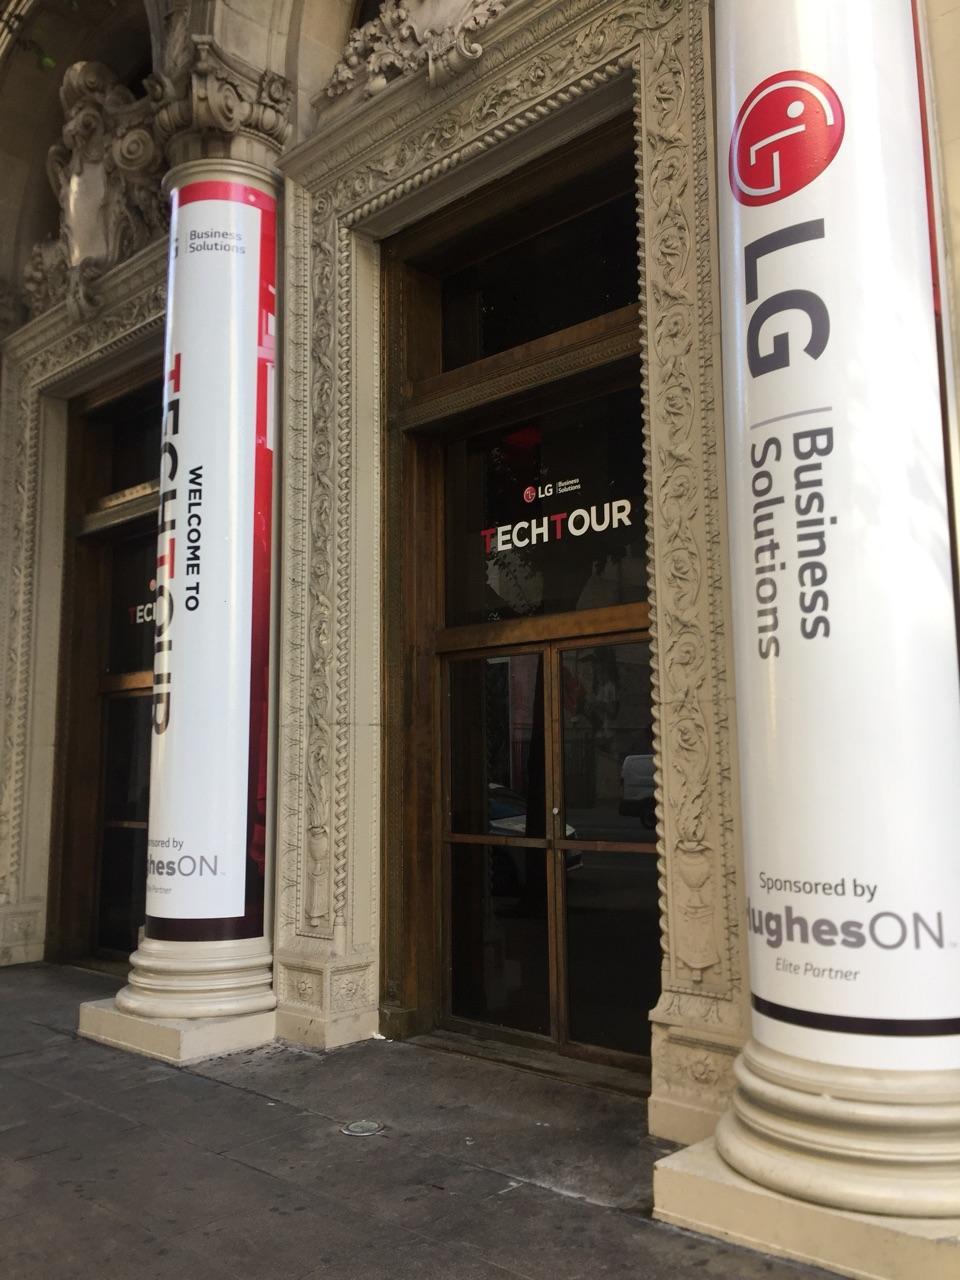 Ingresso dell'evento LG Business Solutions Tech Tour a Los Angeles 2018